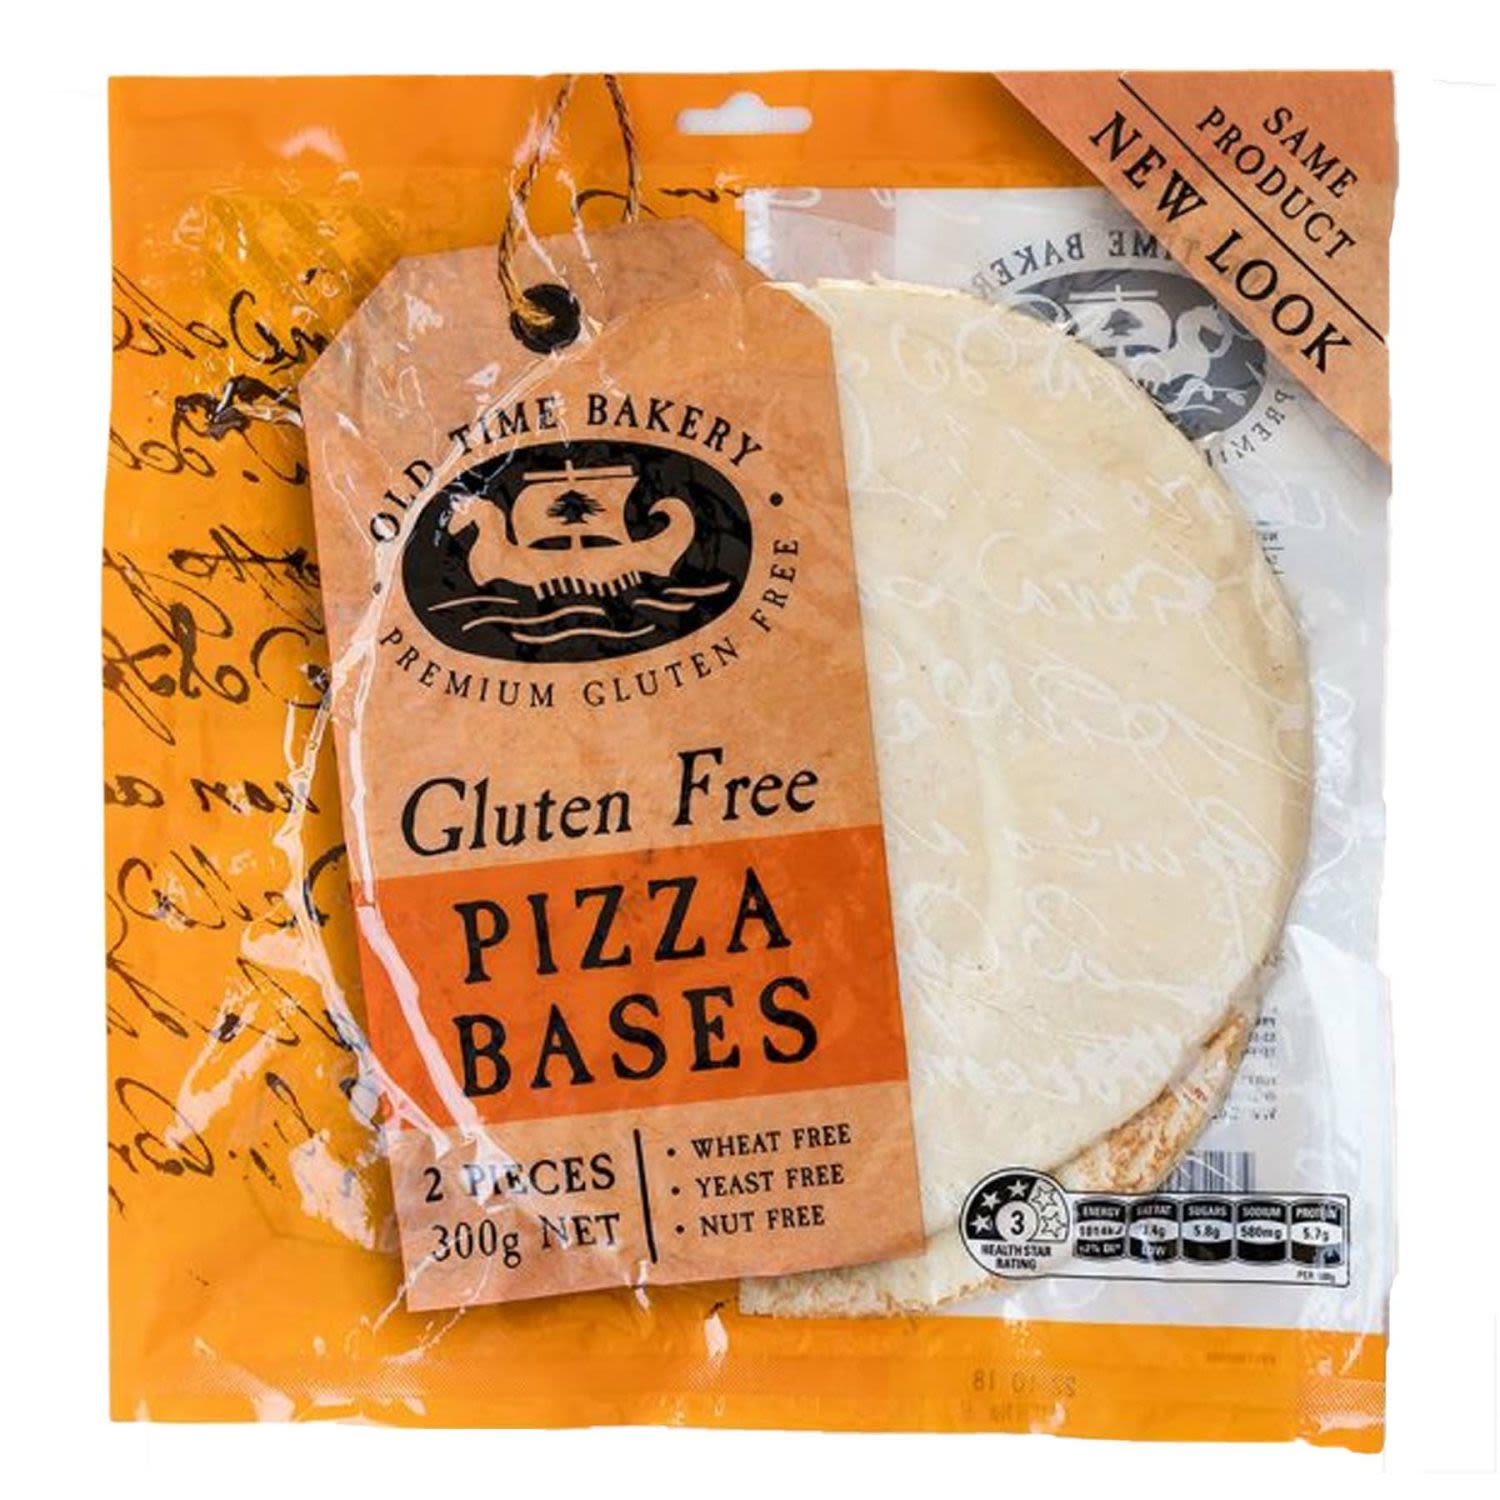 Old Time Bakery Pizza Bases Gluten Free, 2 Each